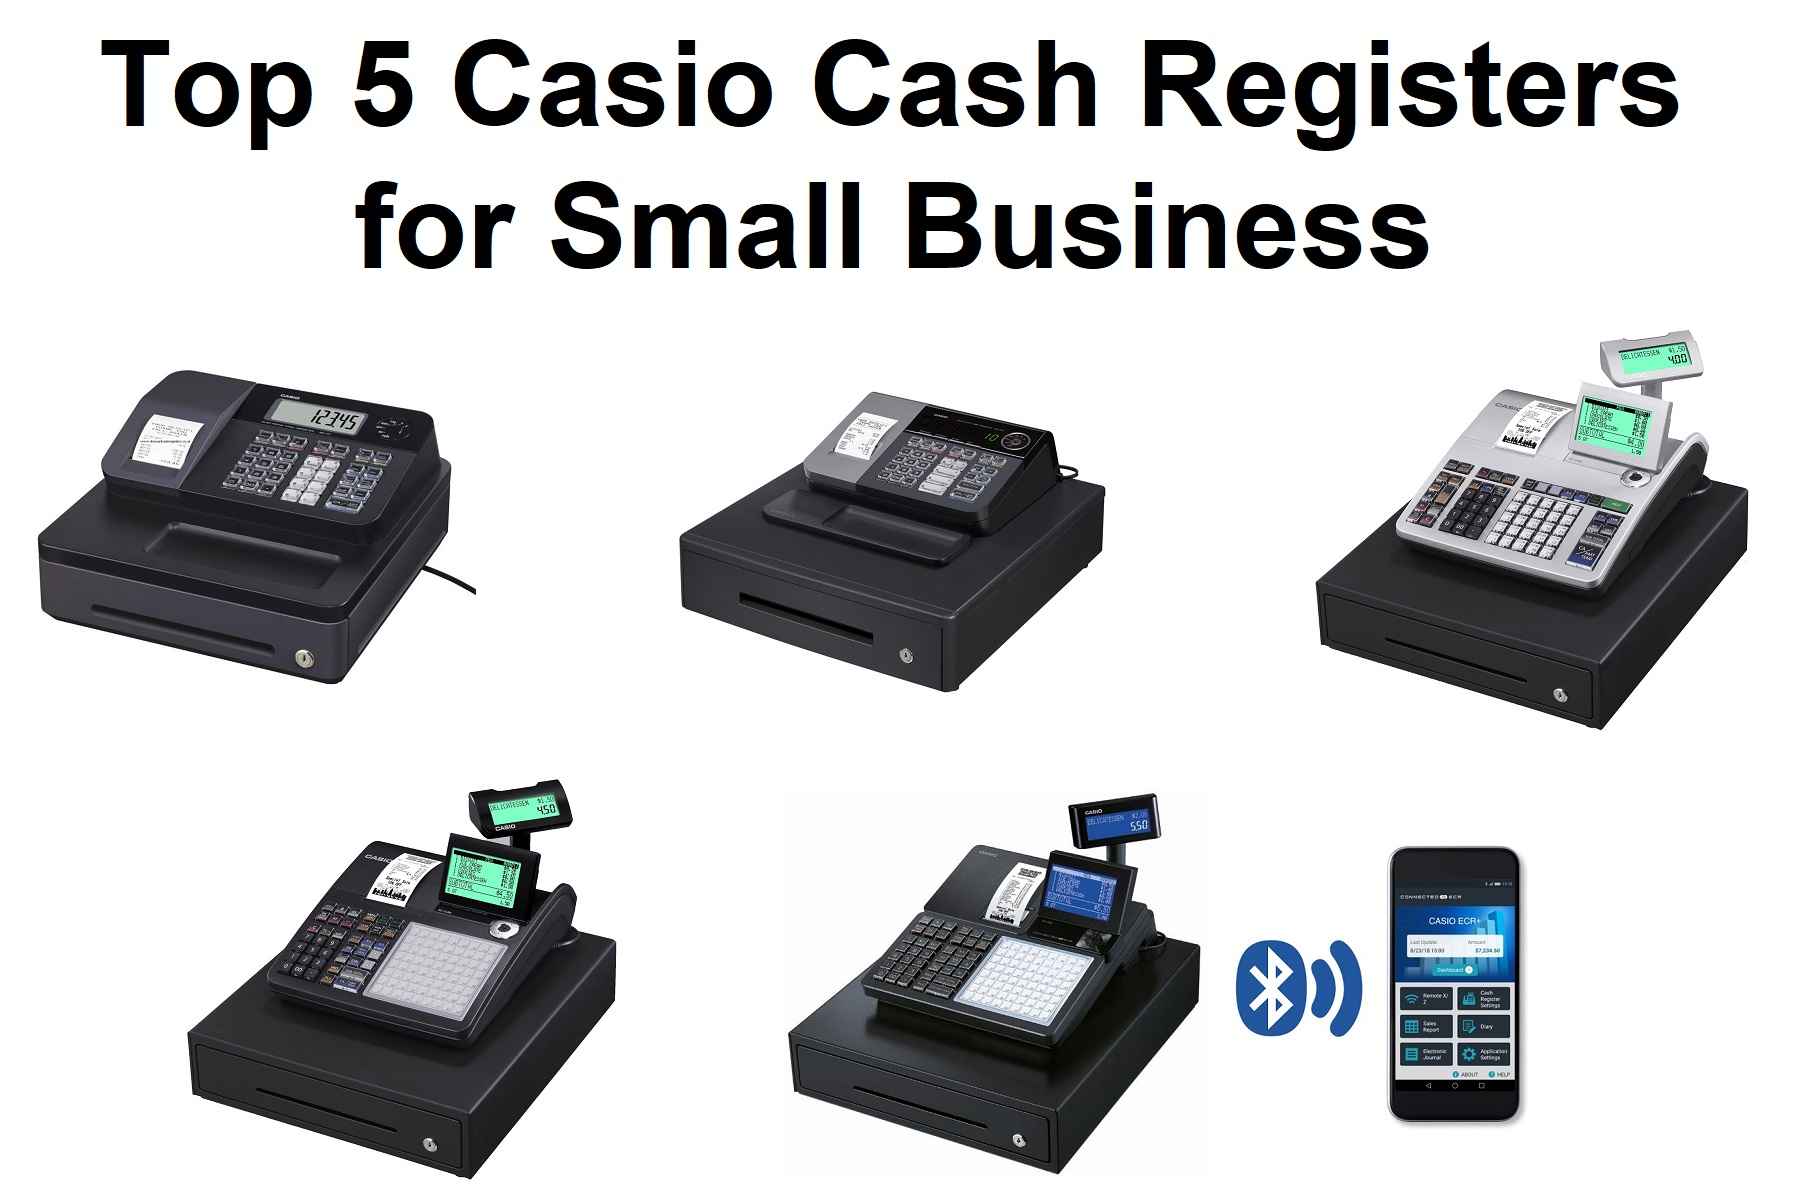 Casio Cash Registers for Small Business 